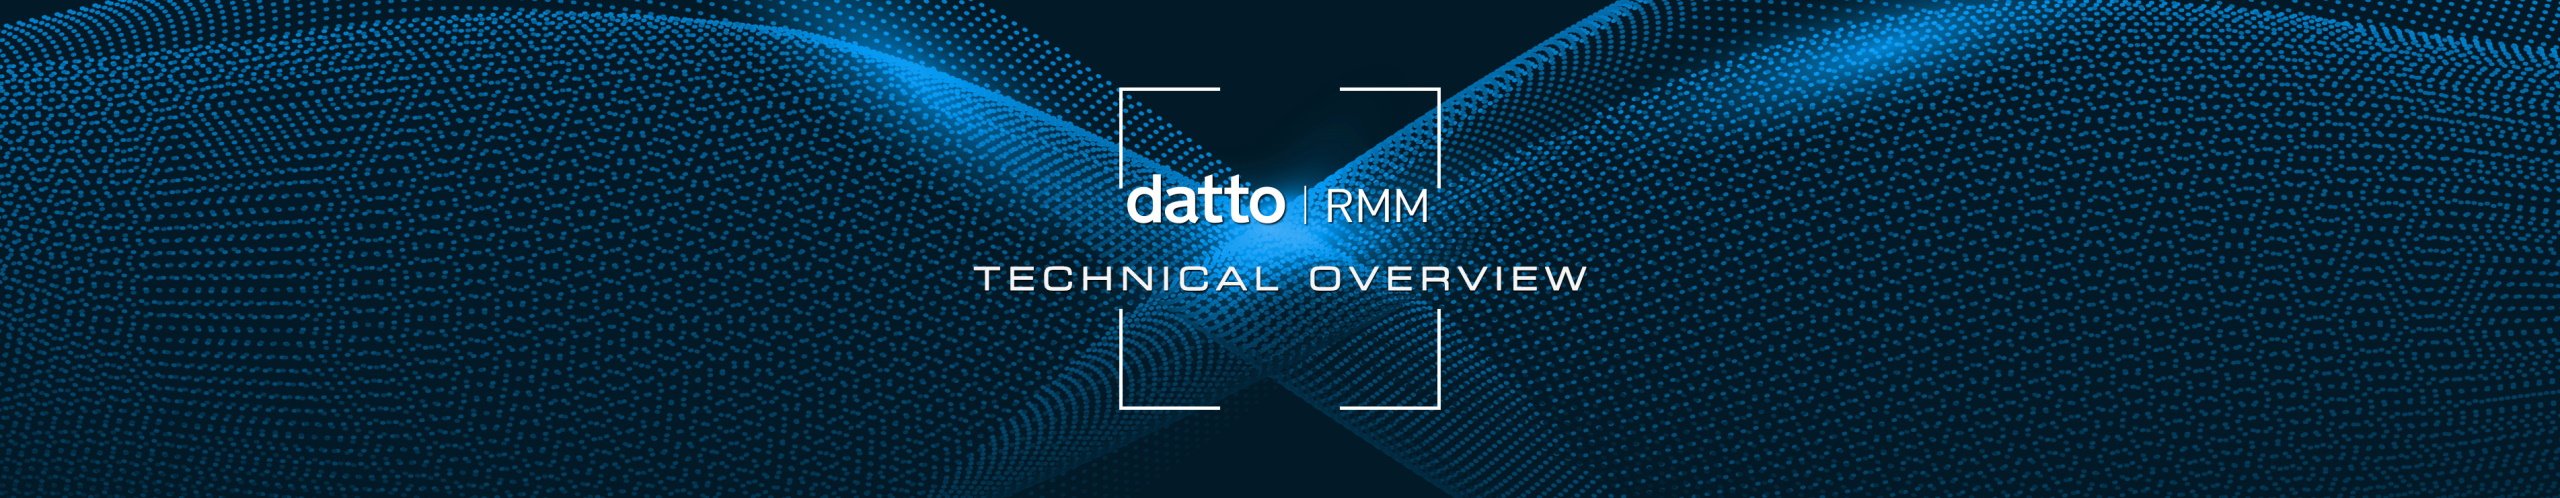 Datto RMM Technical Overview